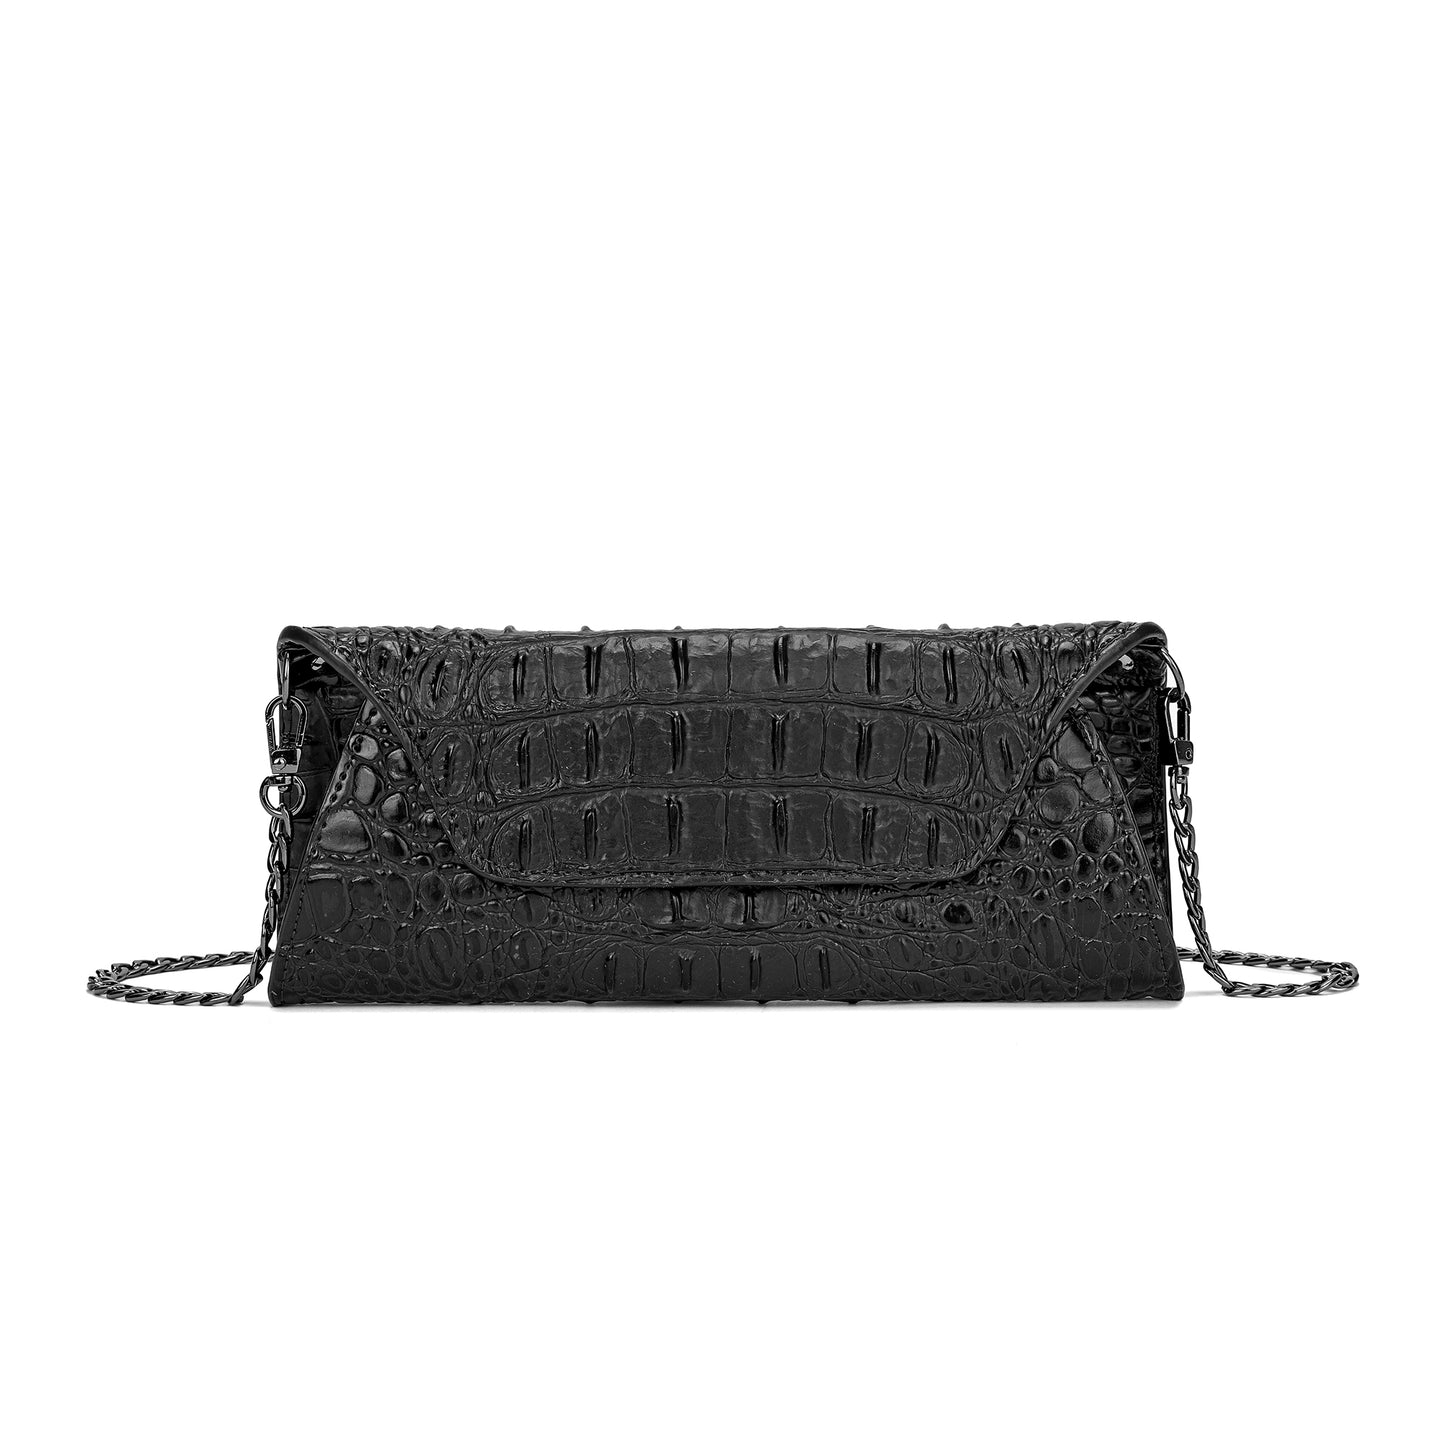 Tiffany & Fred Alligator Embossed Leather Wallet/ Clutch